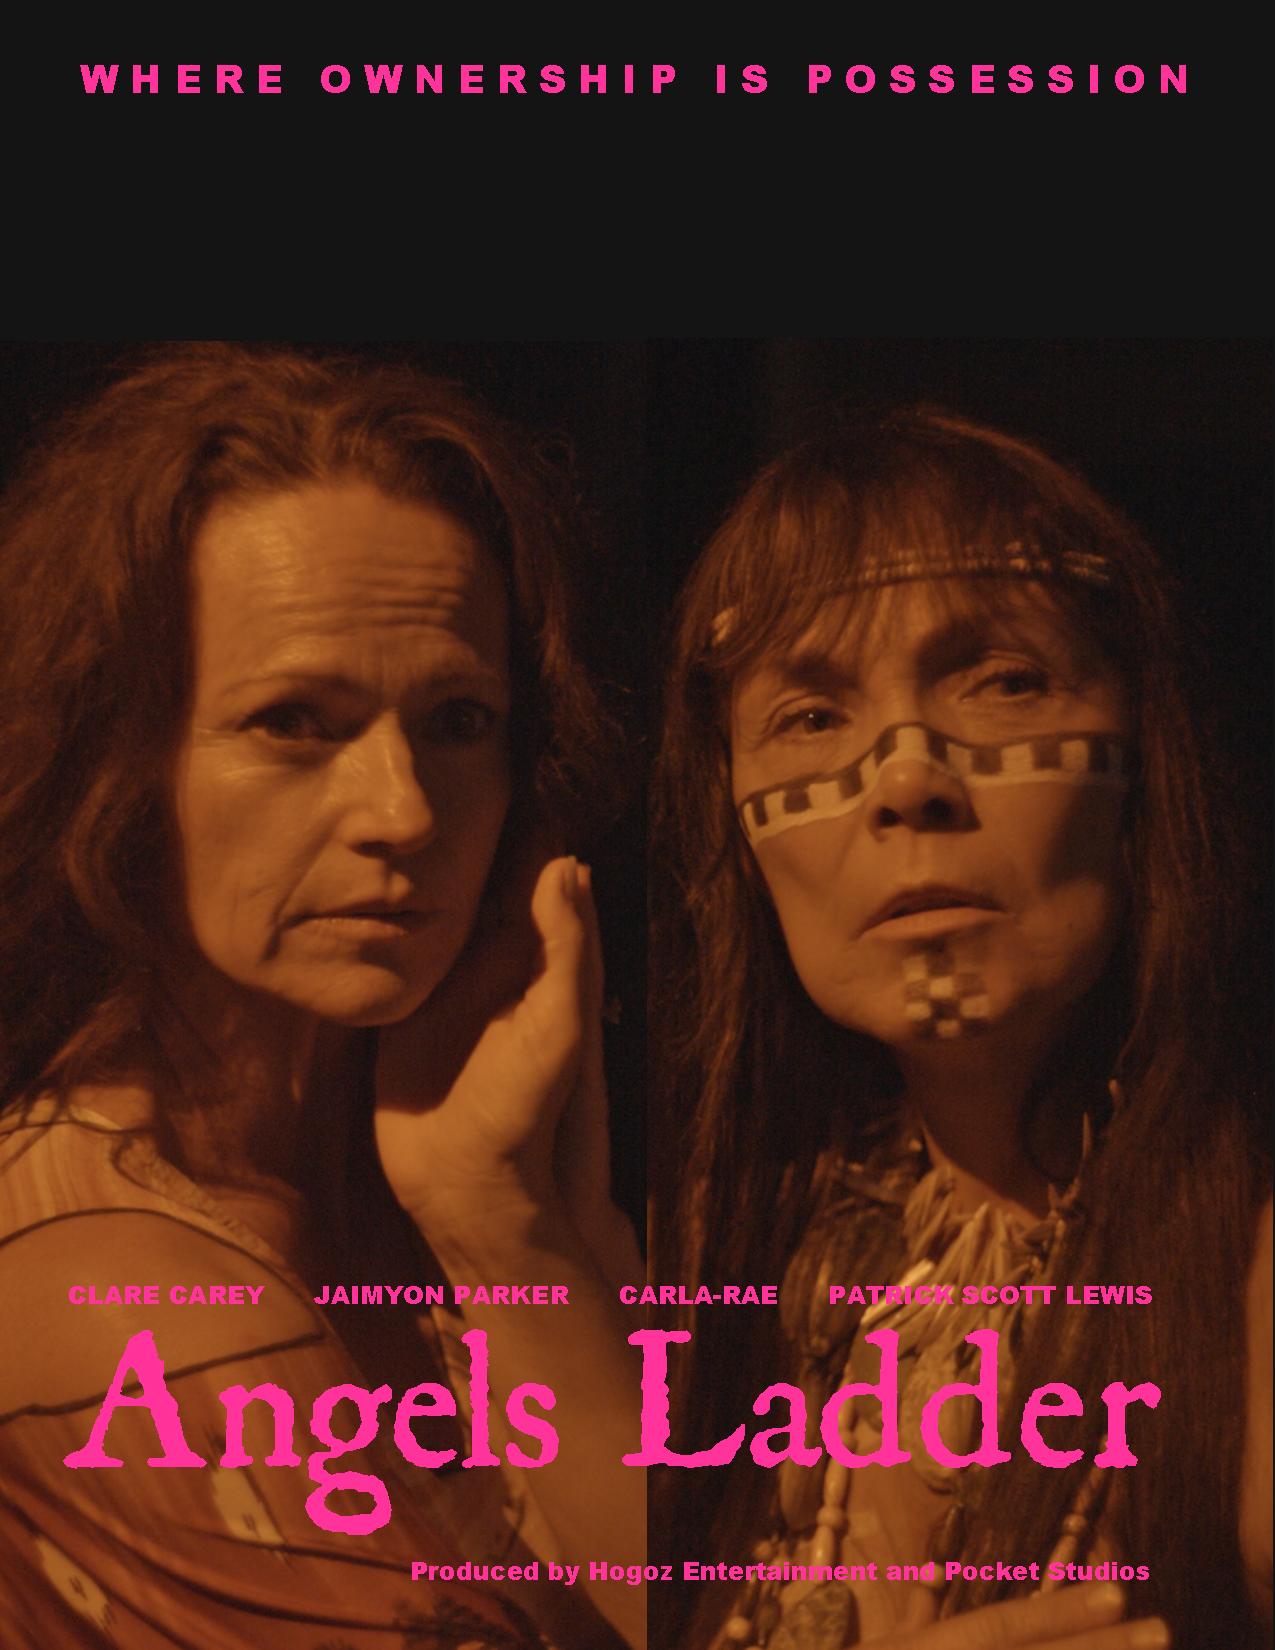 Key art of Angels Ladder shows the faces of two main female characters